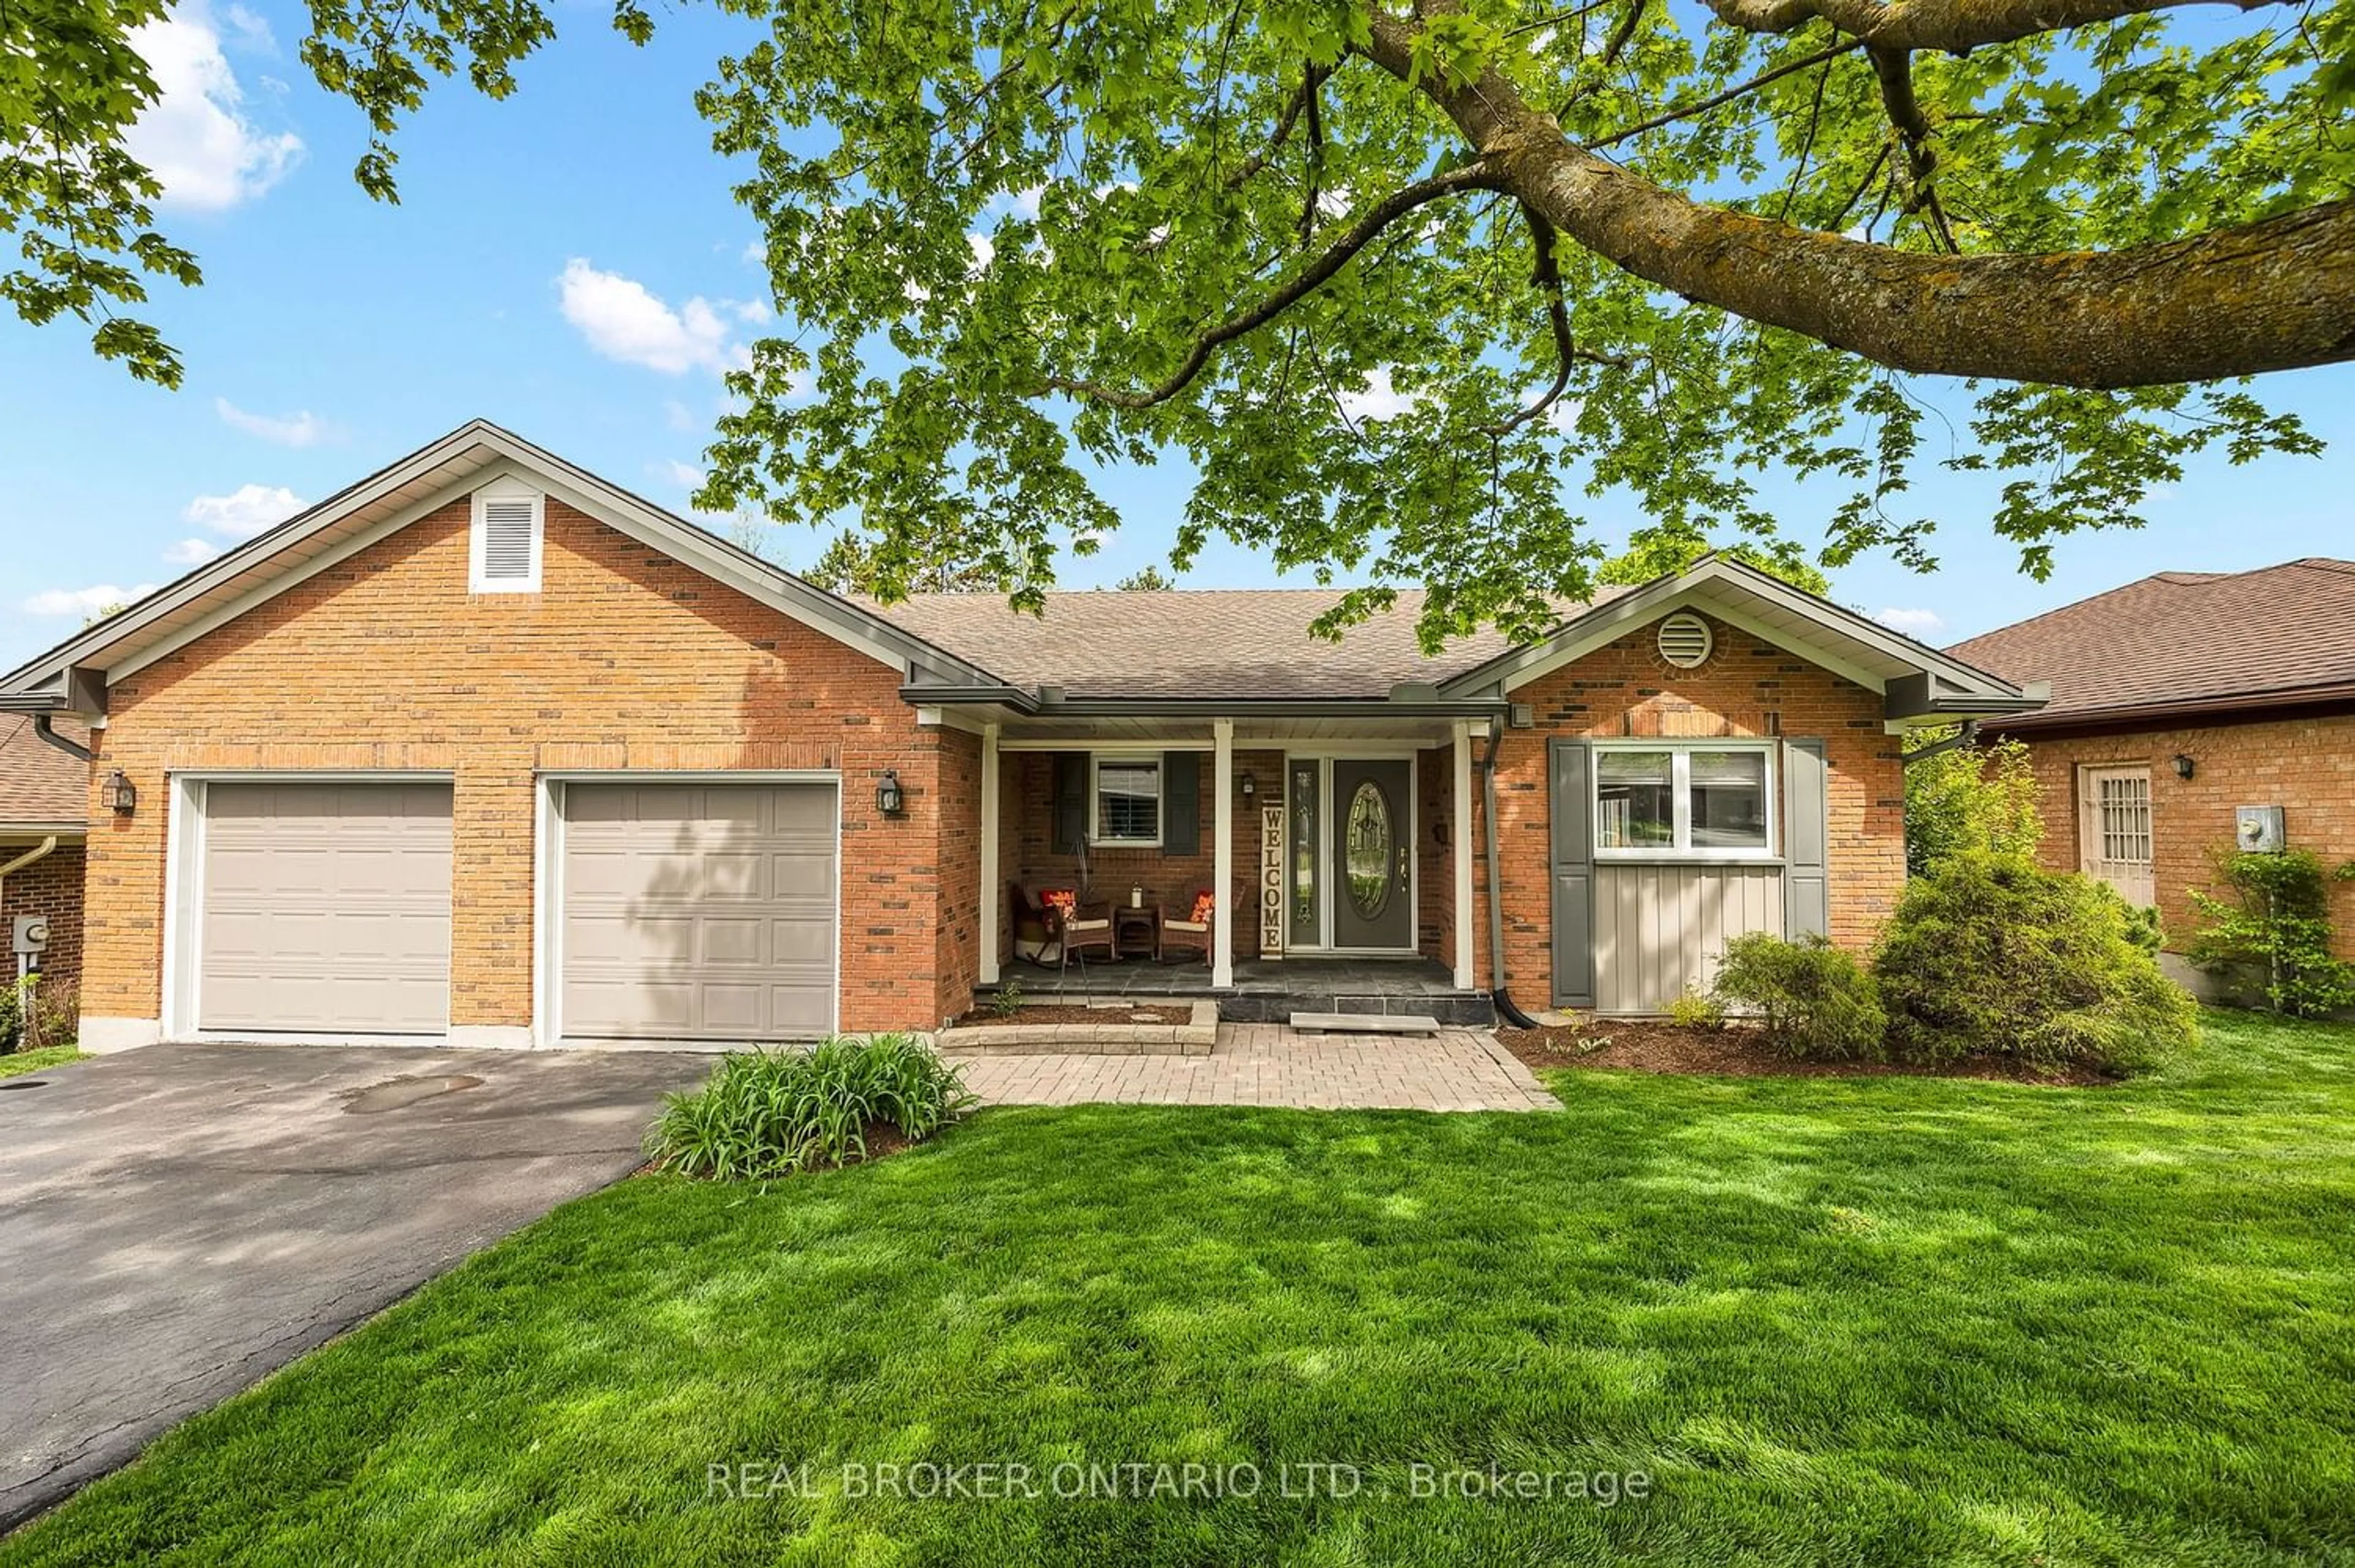 Home with brick exterior material for 318 Roxton Dr, Waterloo Ontario N2T 1R6